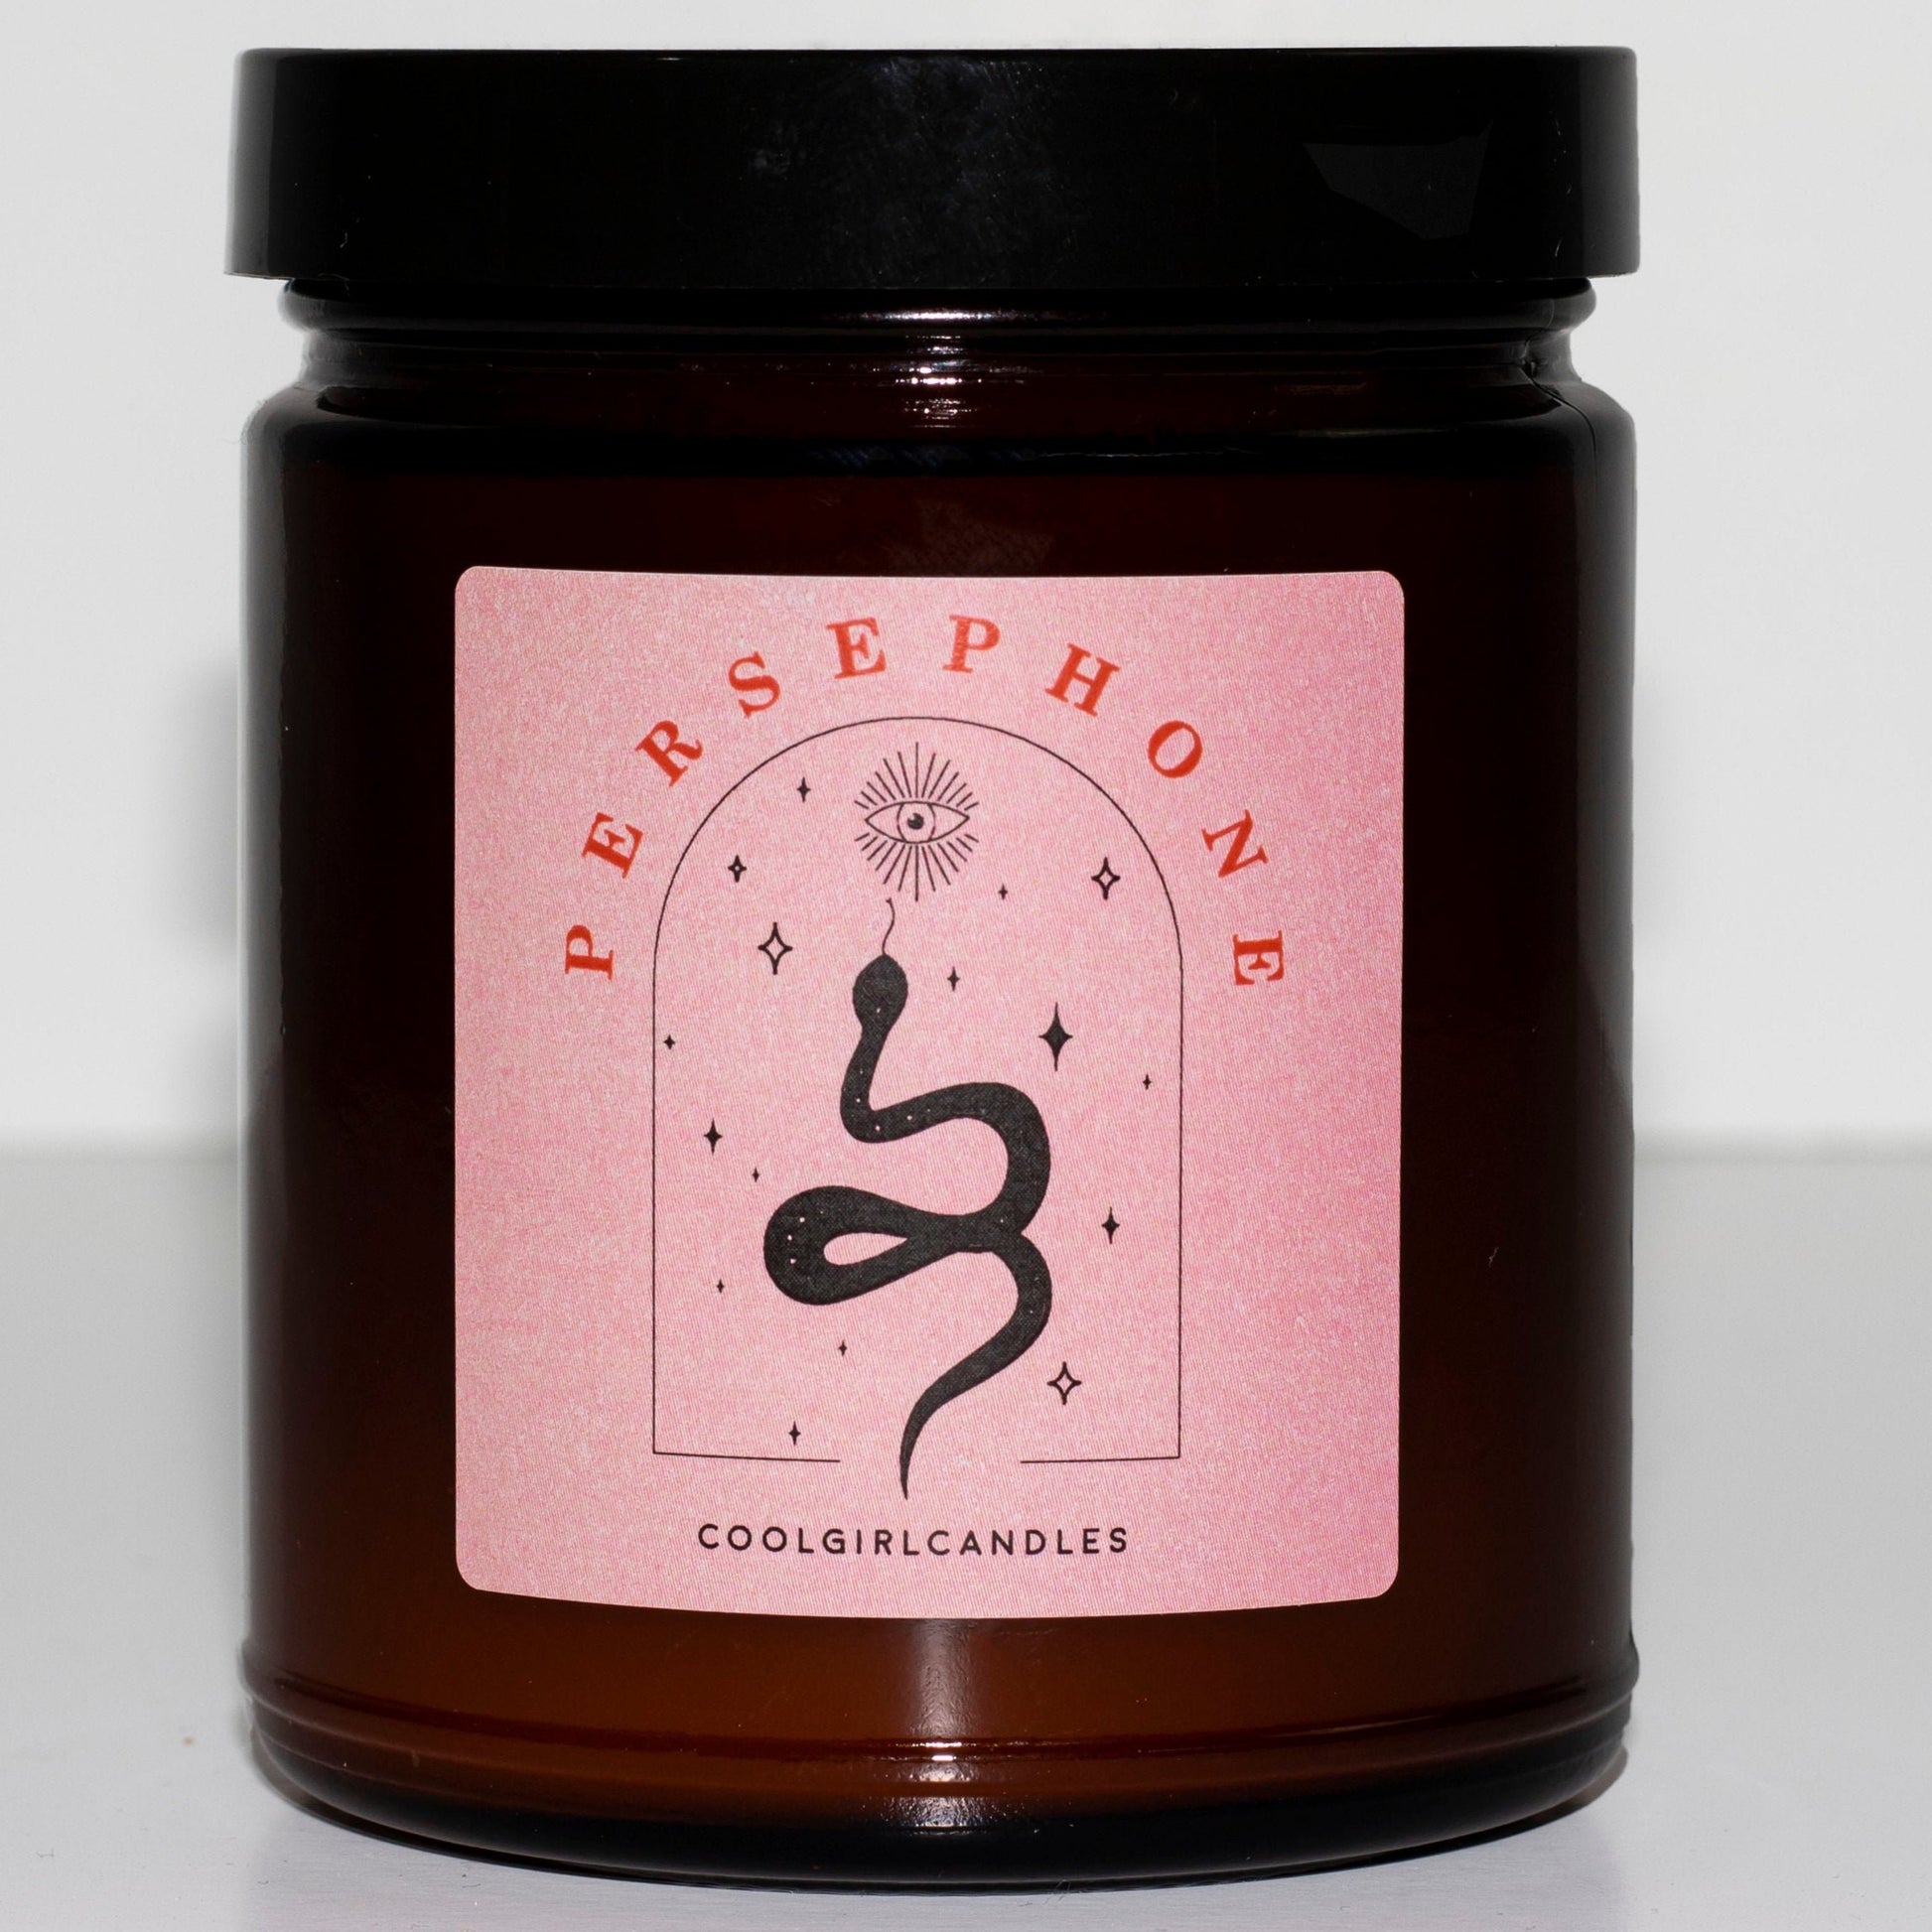 Fall winter 2020 candle persephone with notes of peach, plum, leather, patchouli scented candle